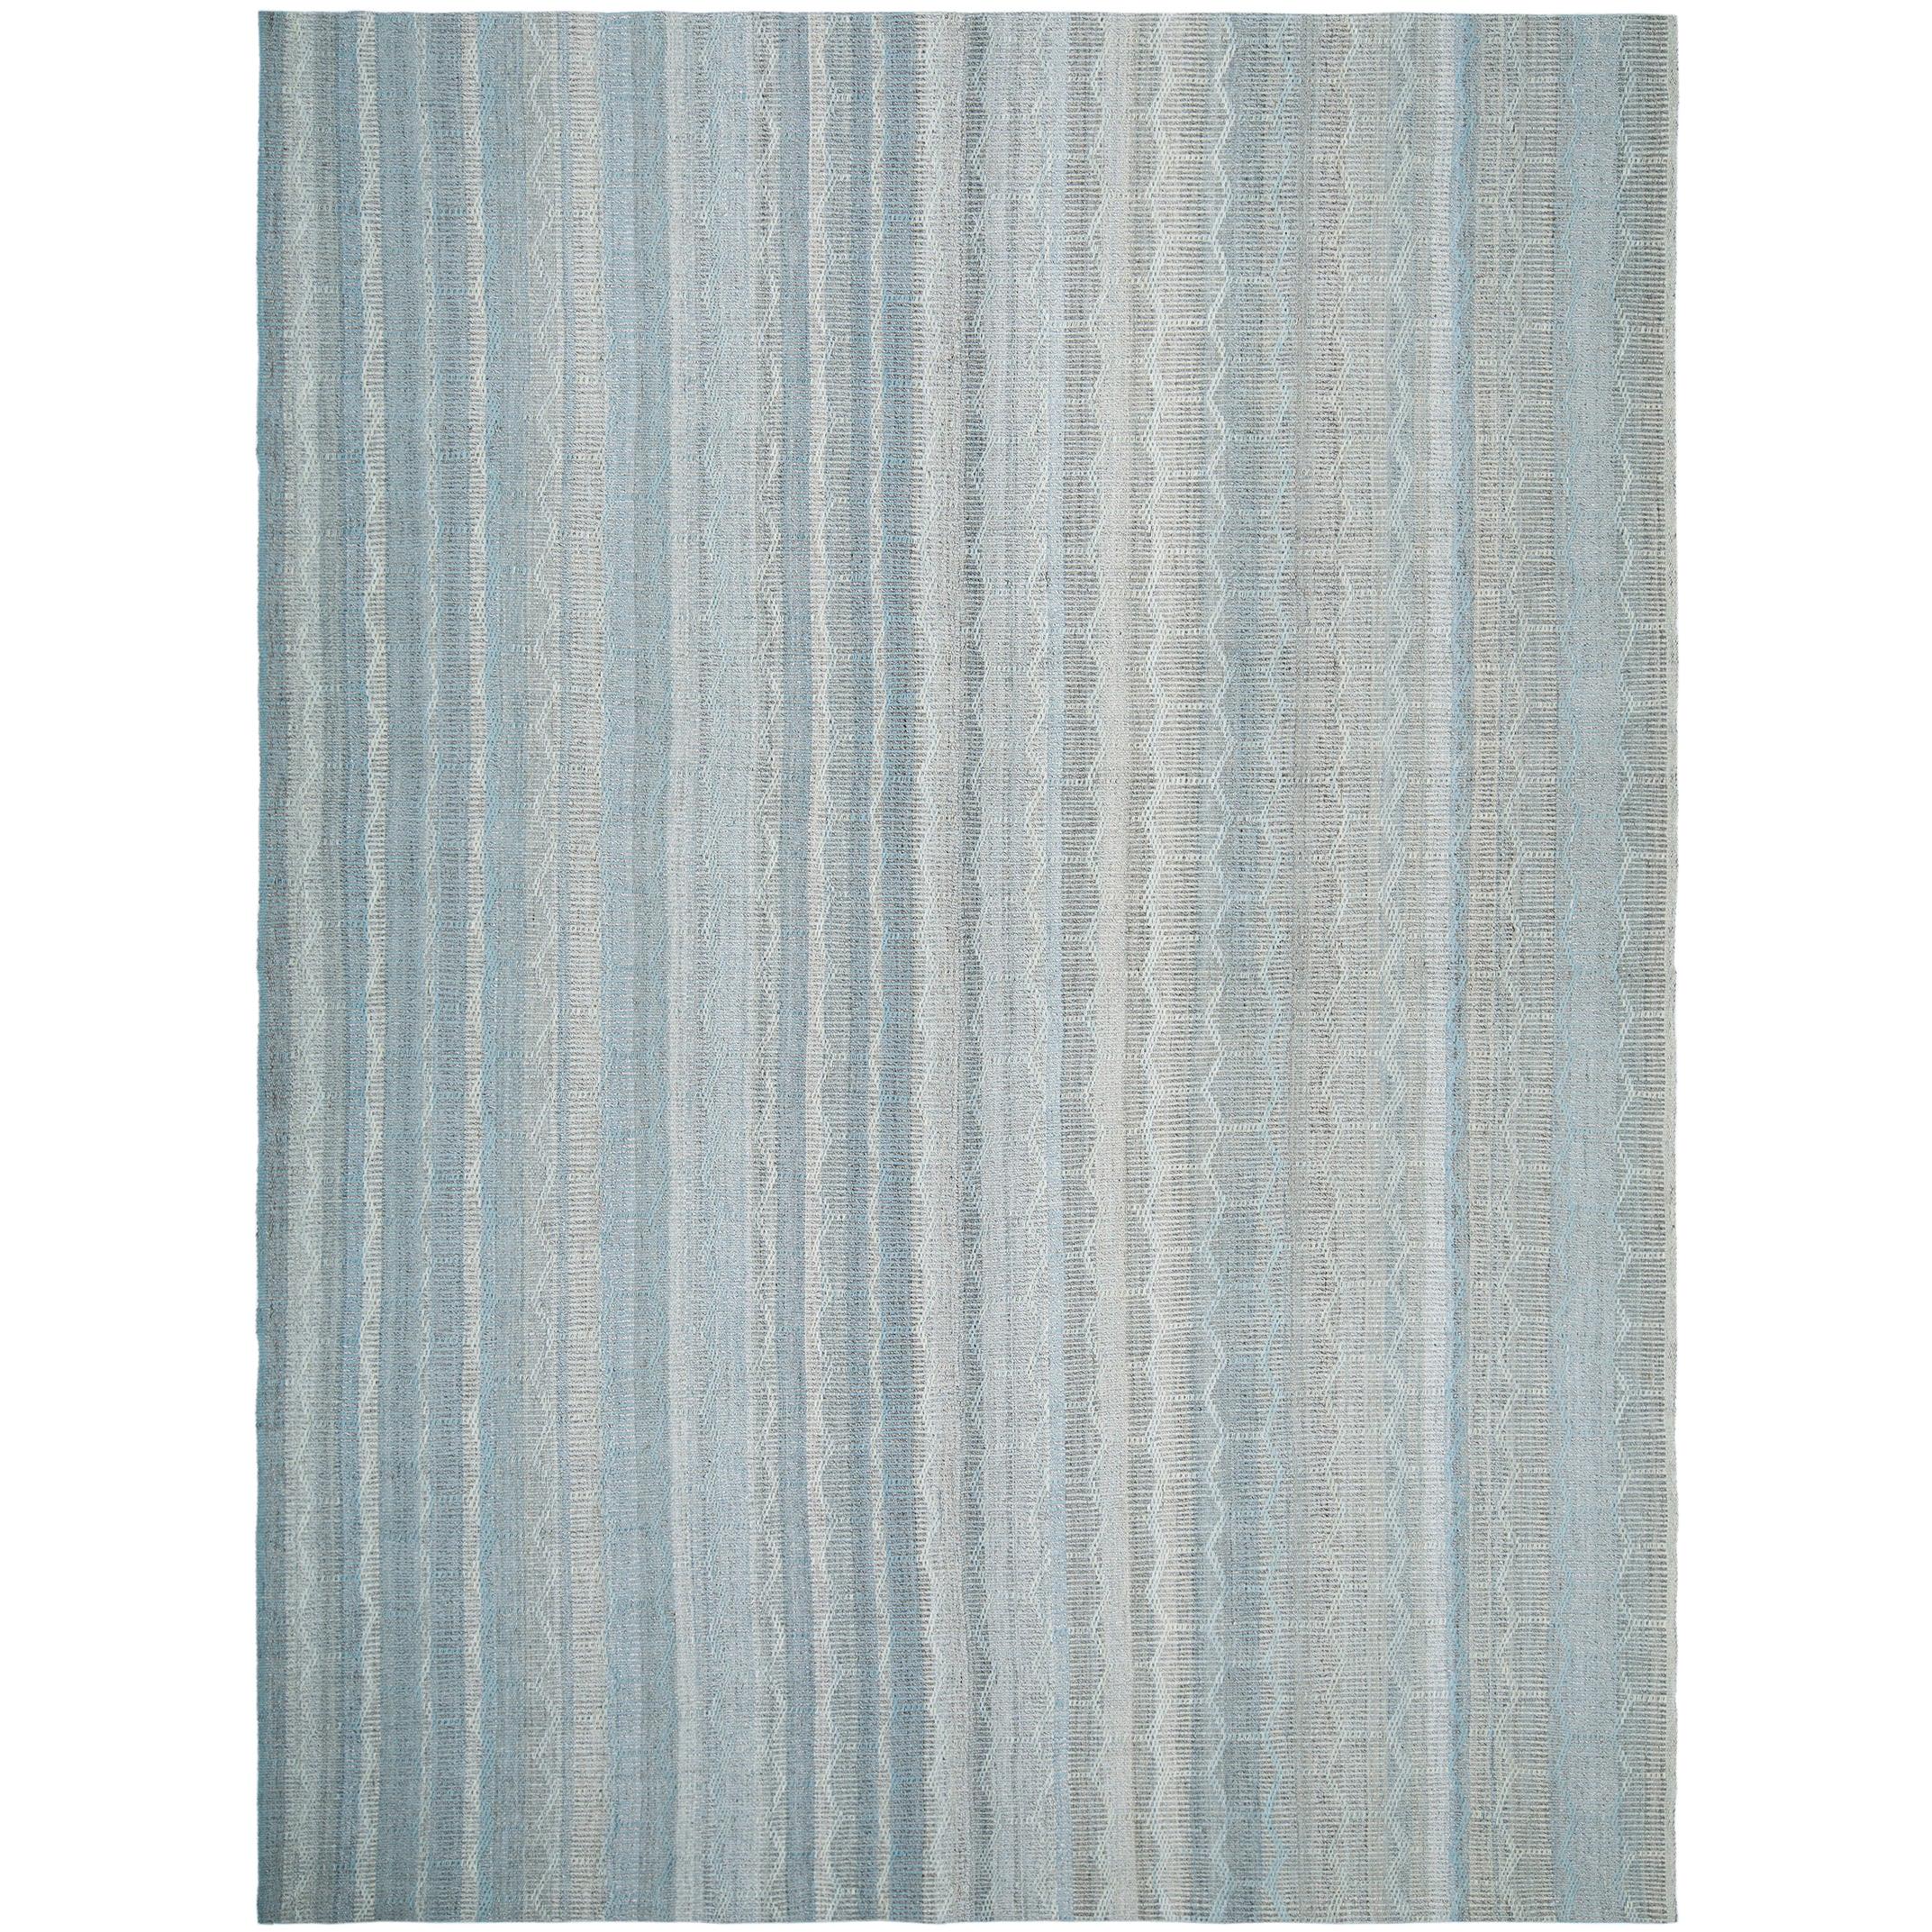 Mid-Century Modern Handwoven Flat-Weave Honeycomb Pattern Rug in Grey and Blue For Sale